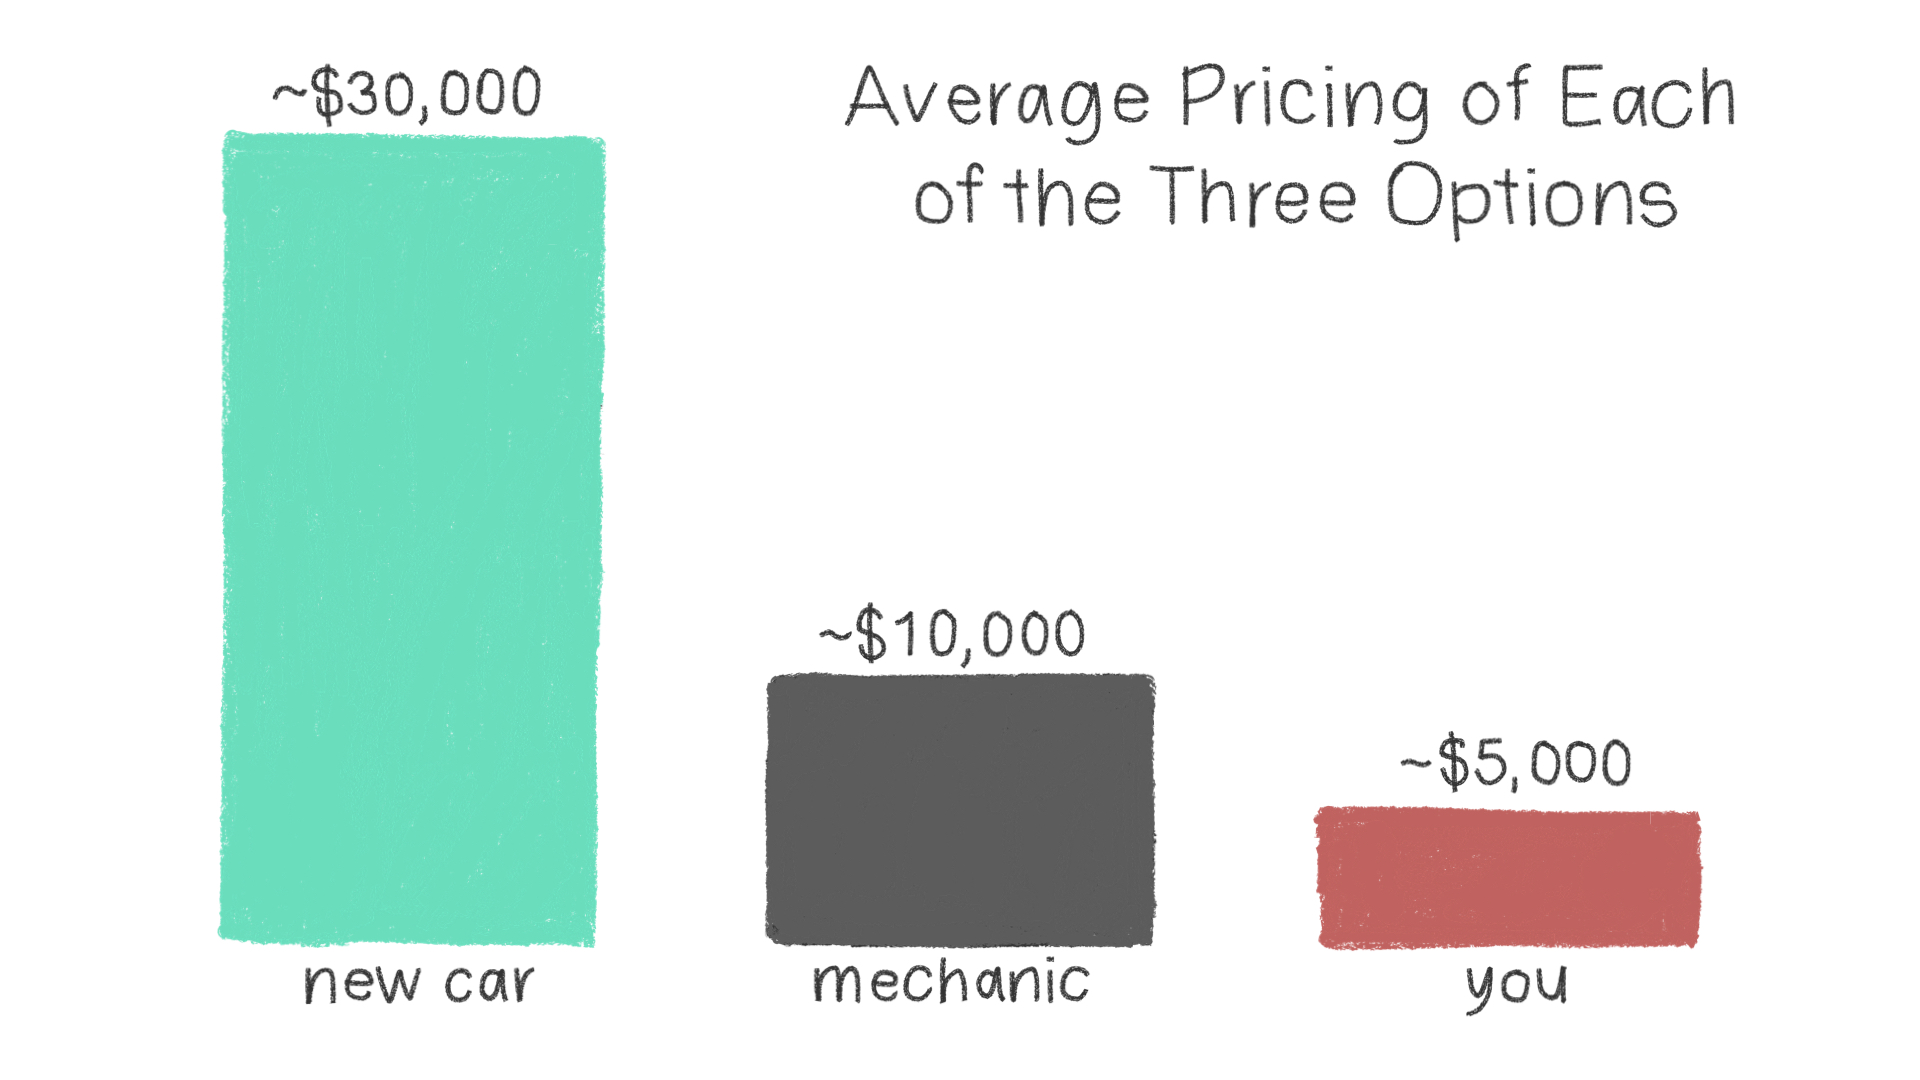 Graph comparing prices of new cars, shop repairs and home repairs